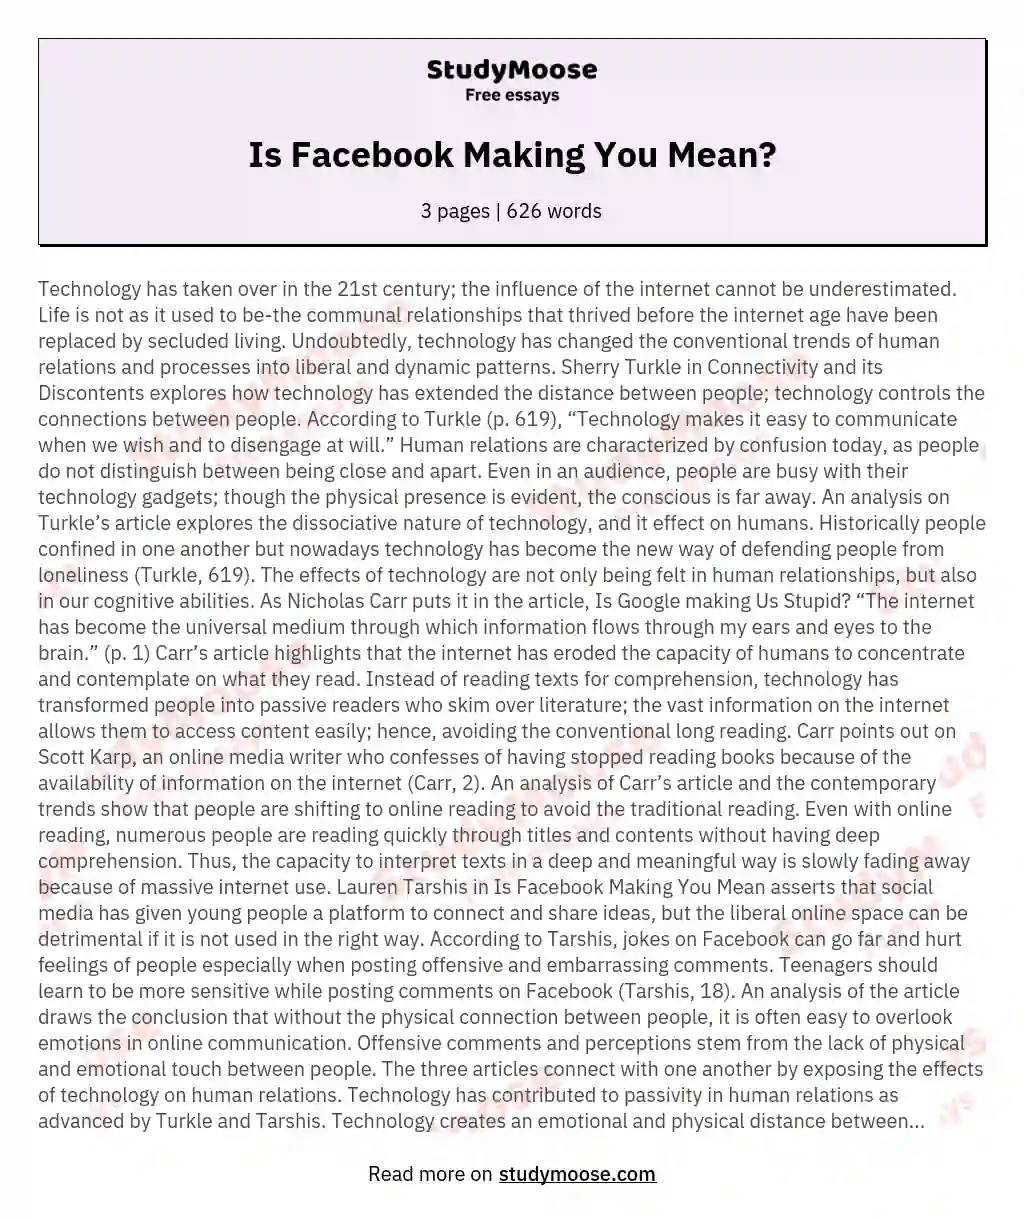 Is Facebook Making You Mean? essay